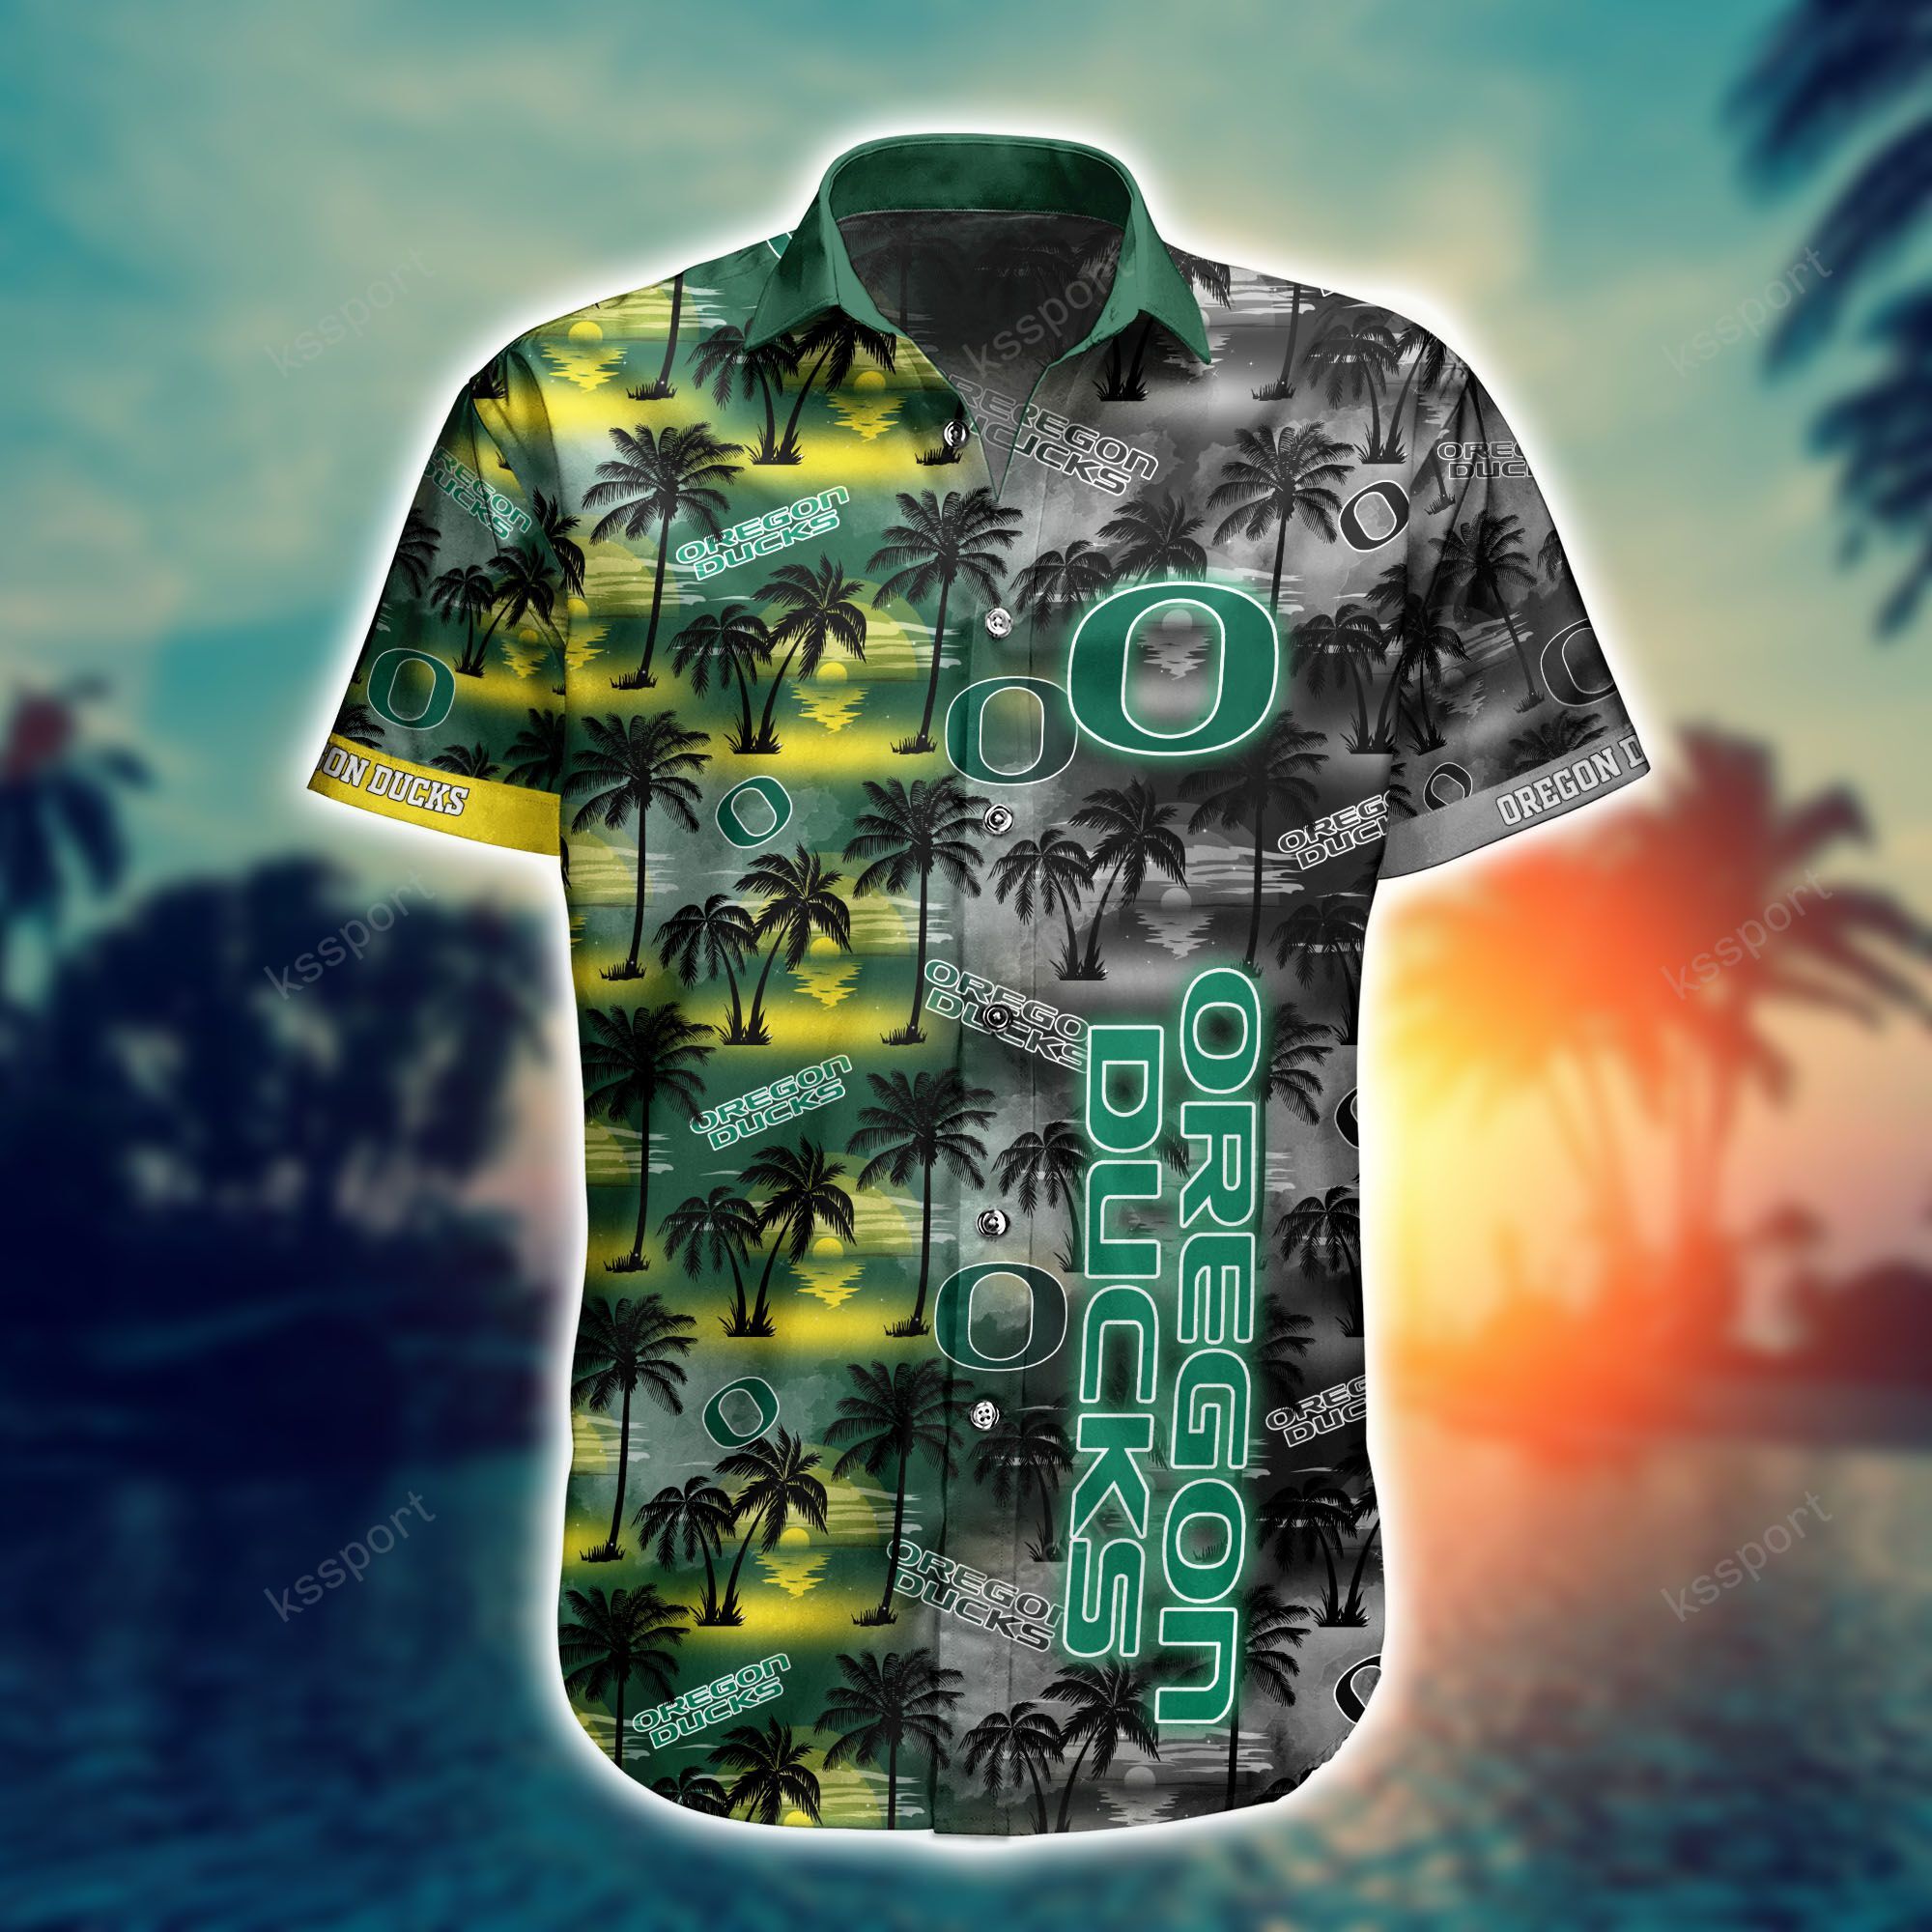 Top cool Hawaiian shirt 2022 - Make sure you get yours today before they run out! 164